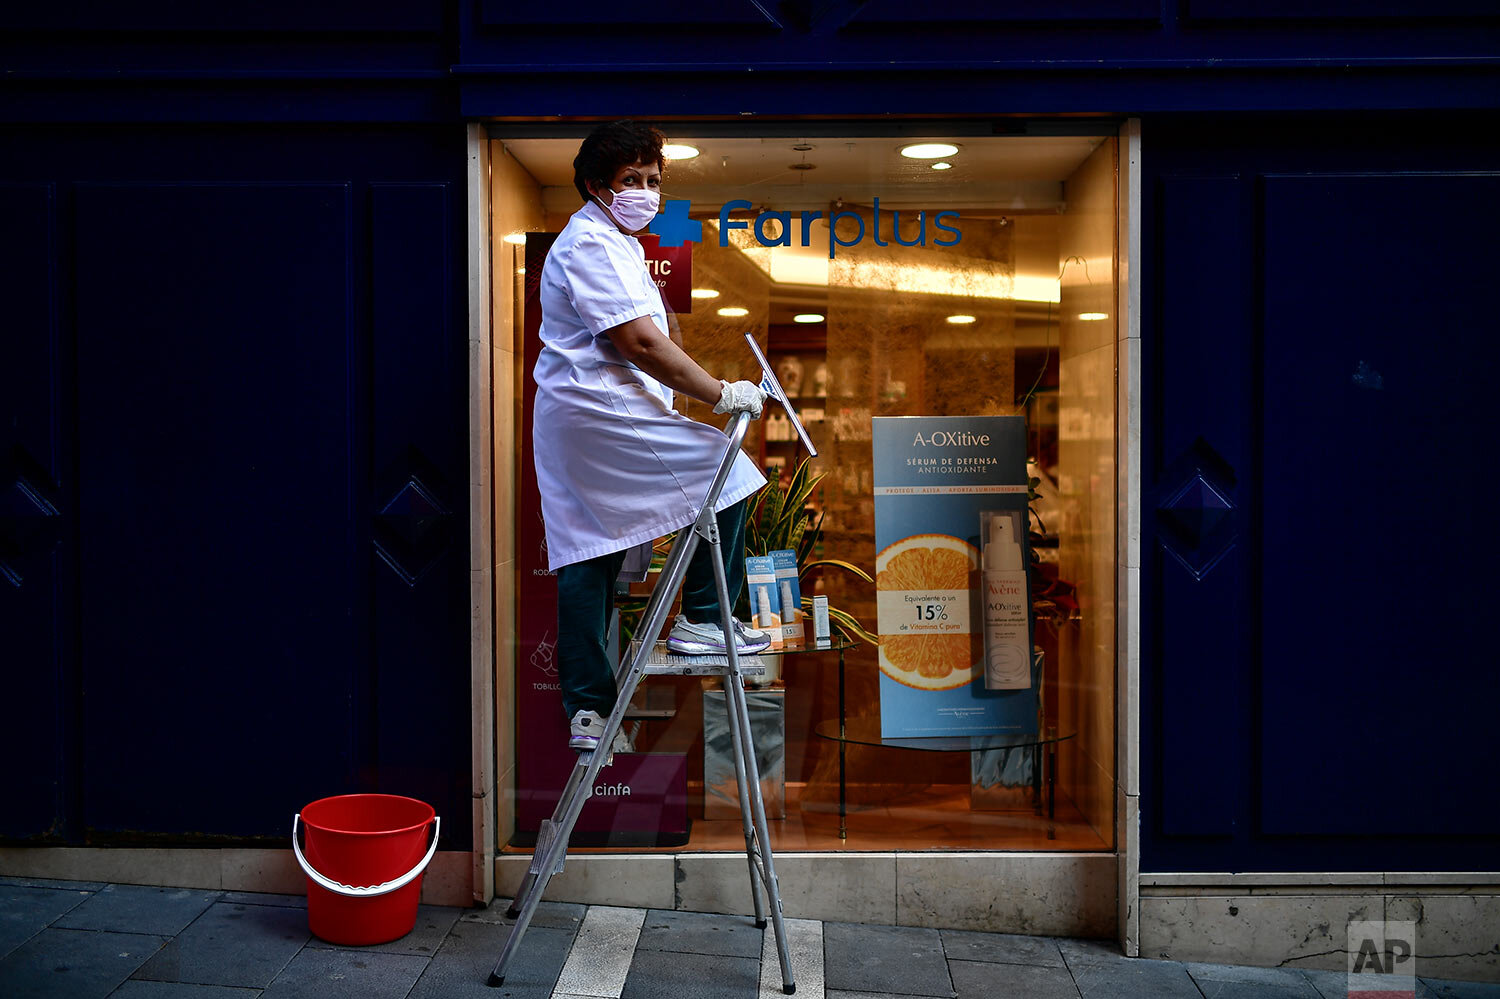  Matilde Mattos, of Peru, poses for a photograph as she clean windows in Pamplona, northern Spain. (AP Photo/Alvaro Barrientos) 